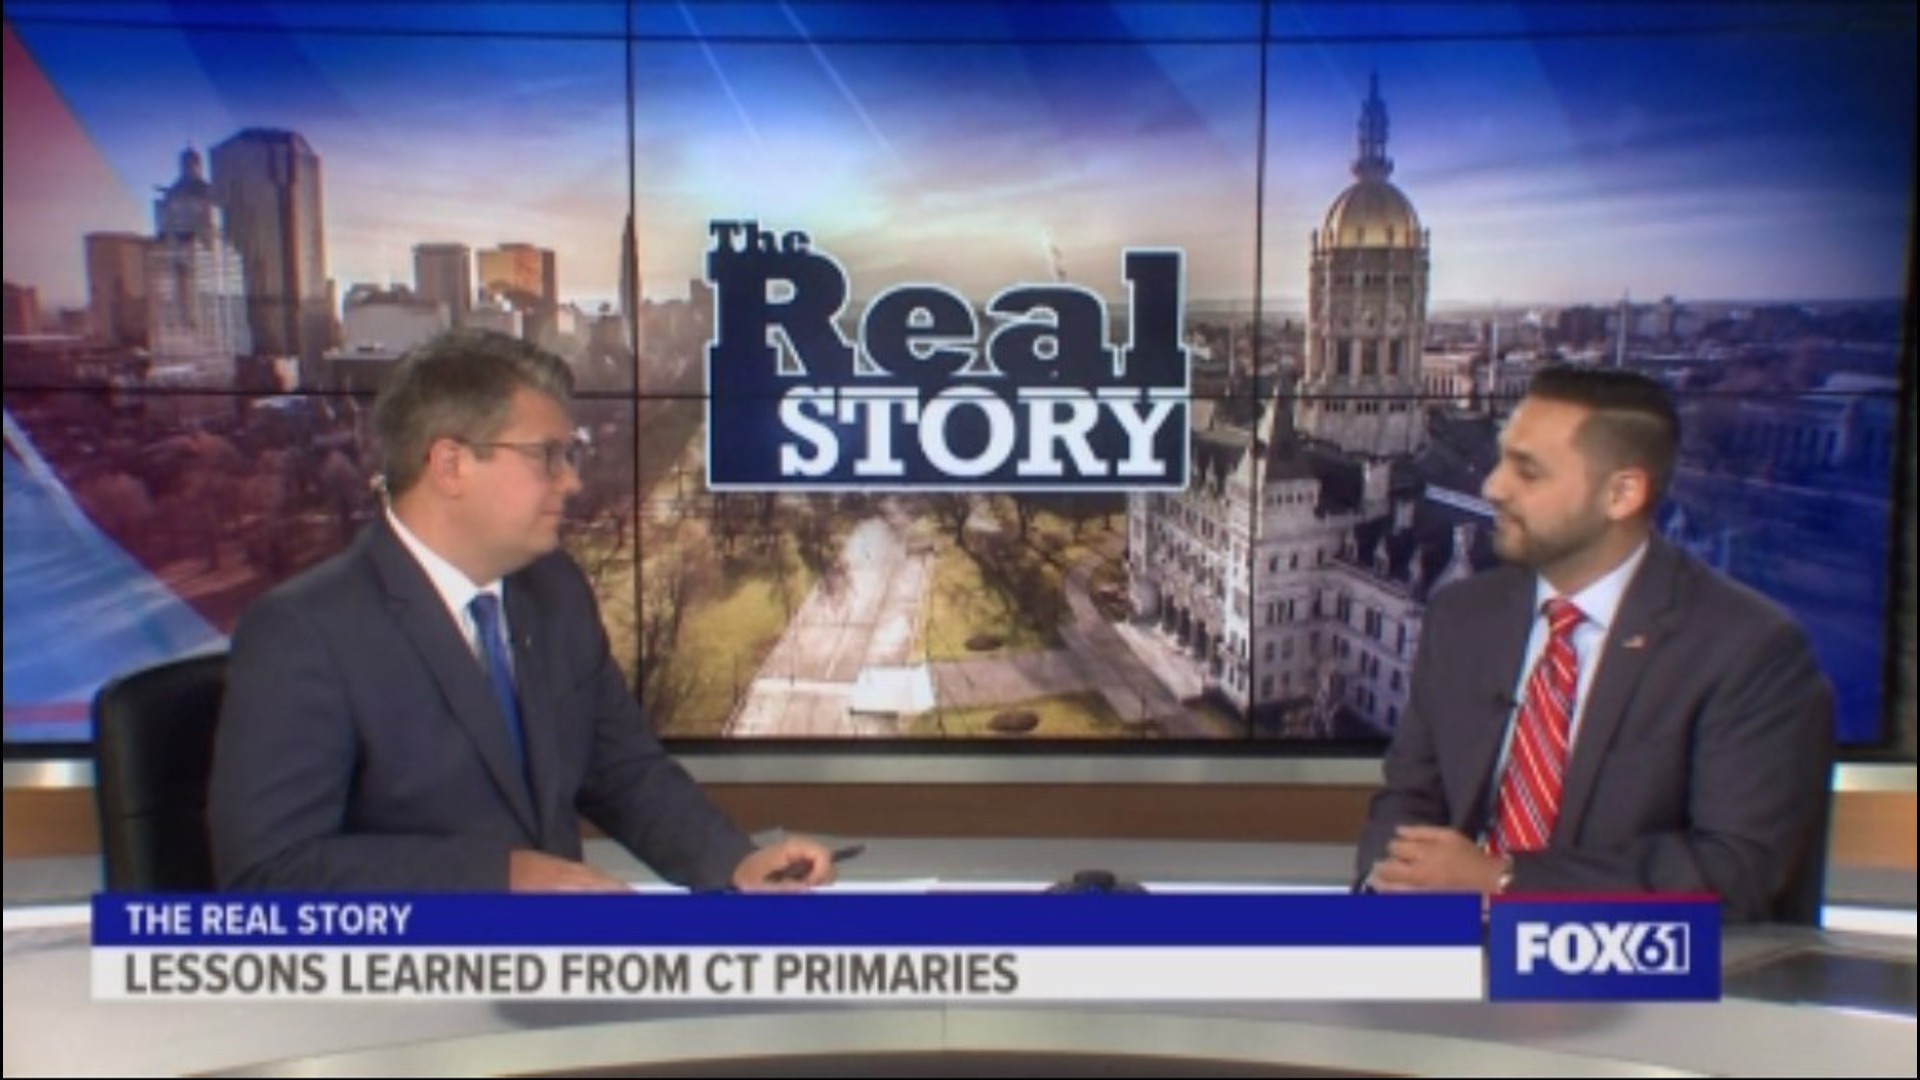 Post University Prof. Michael Ferguson talks about the results from the CT Primaries and how the races stack up for the election in November.